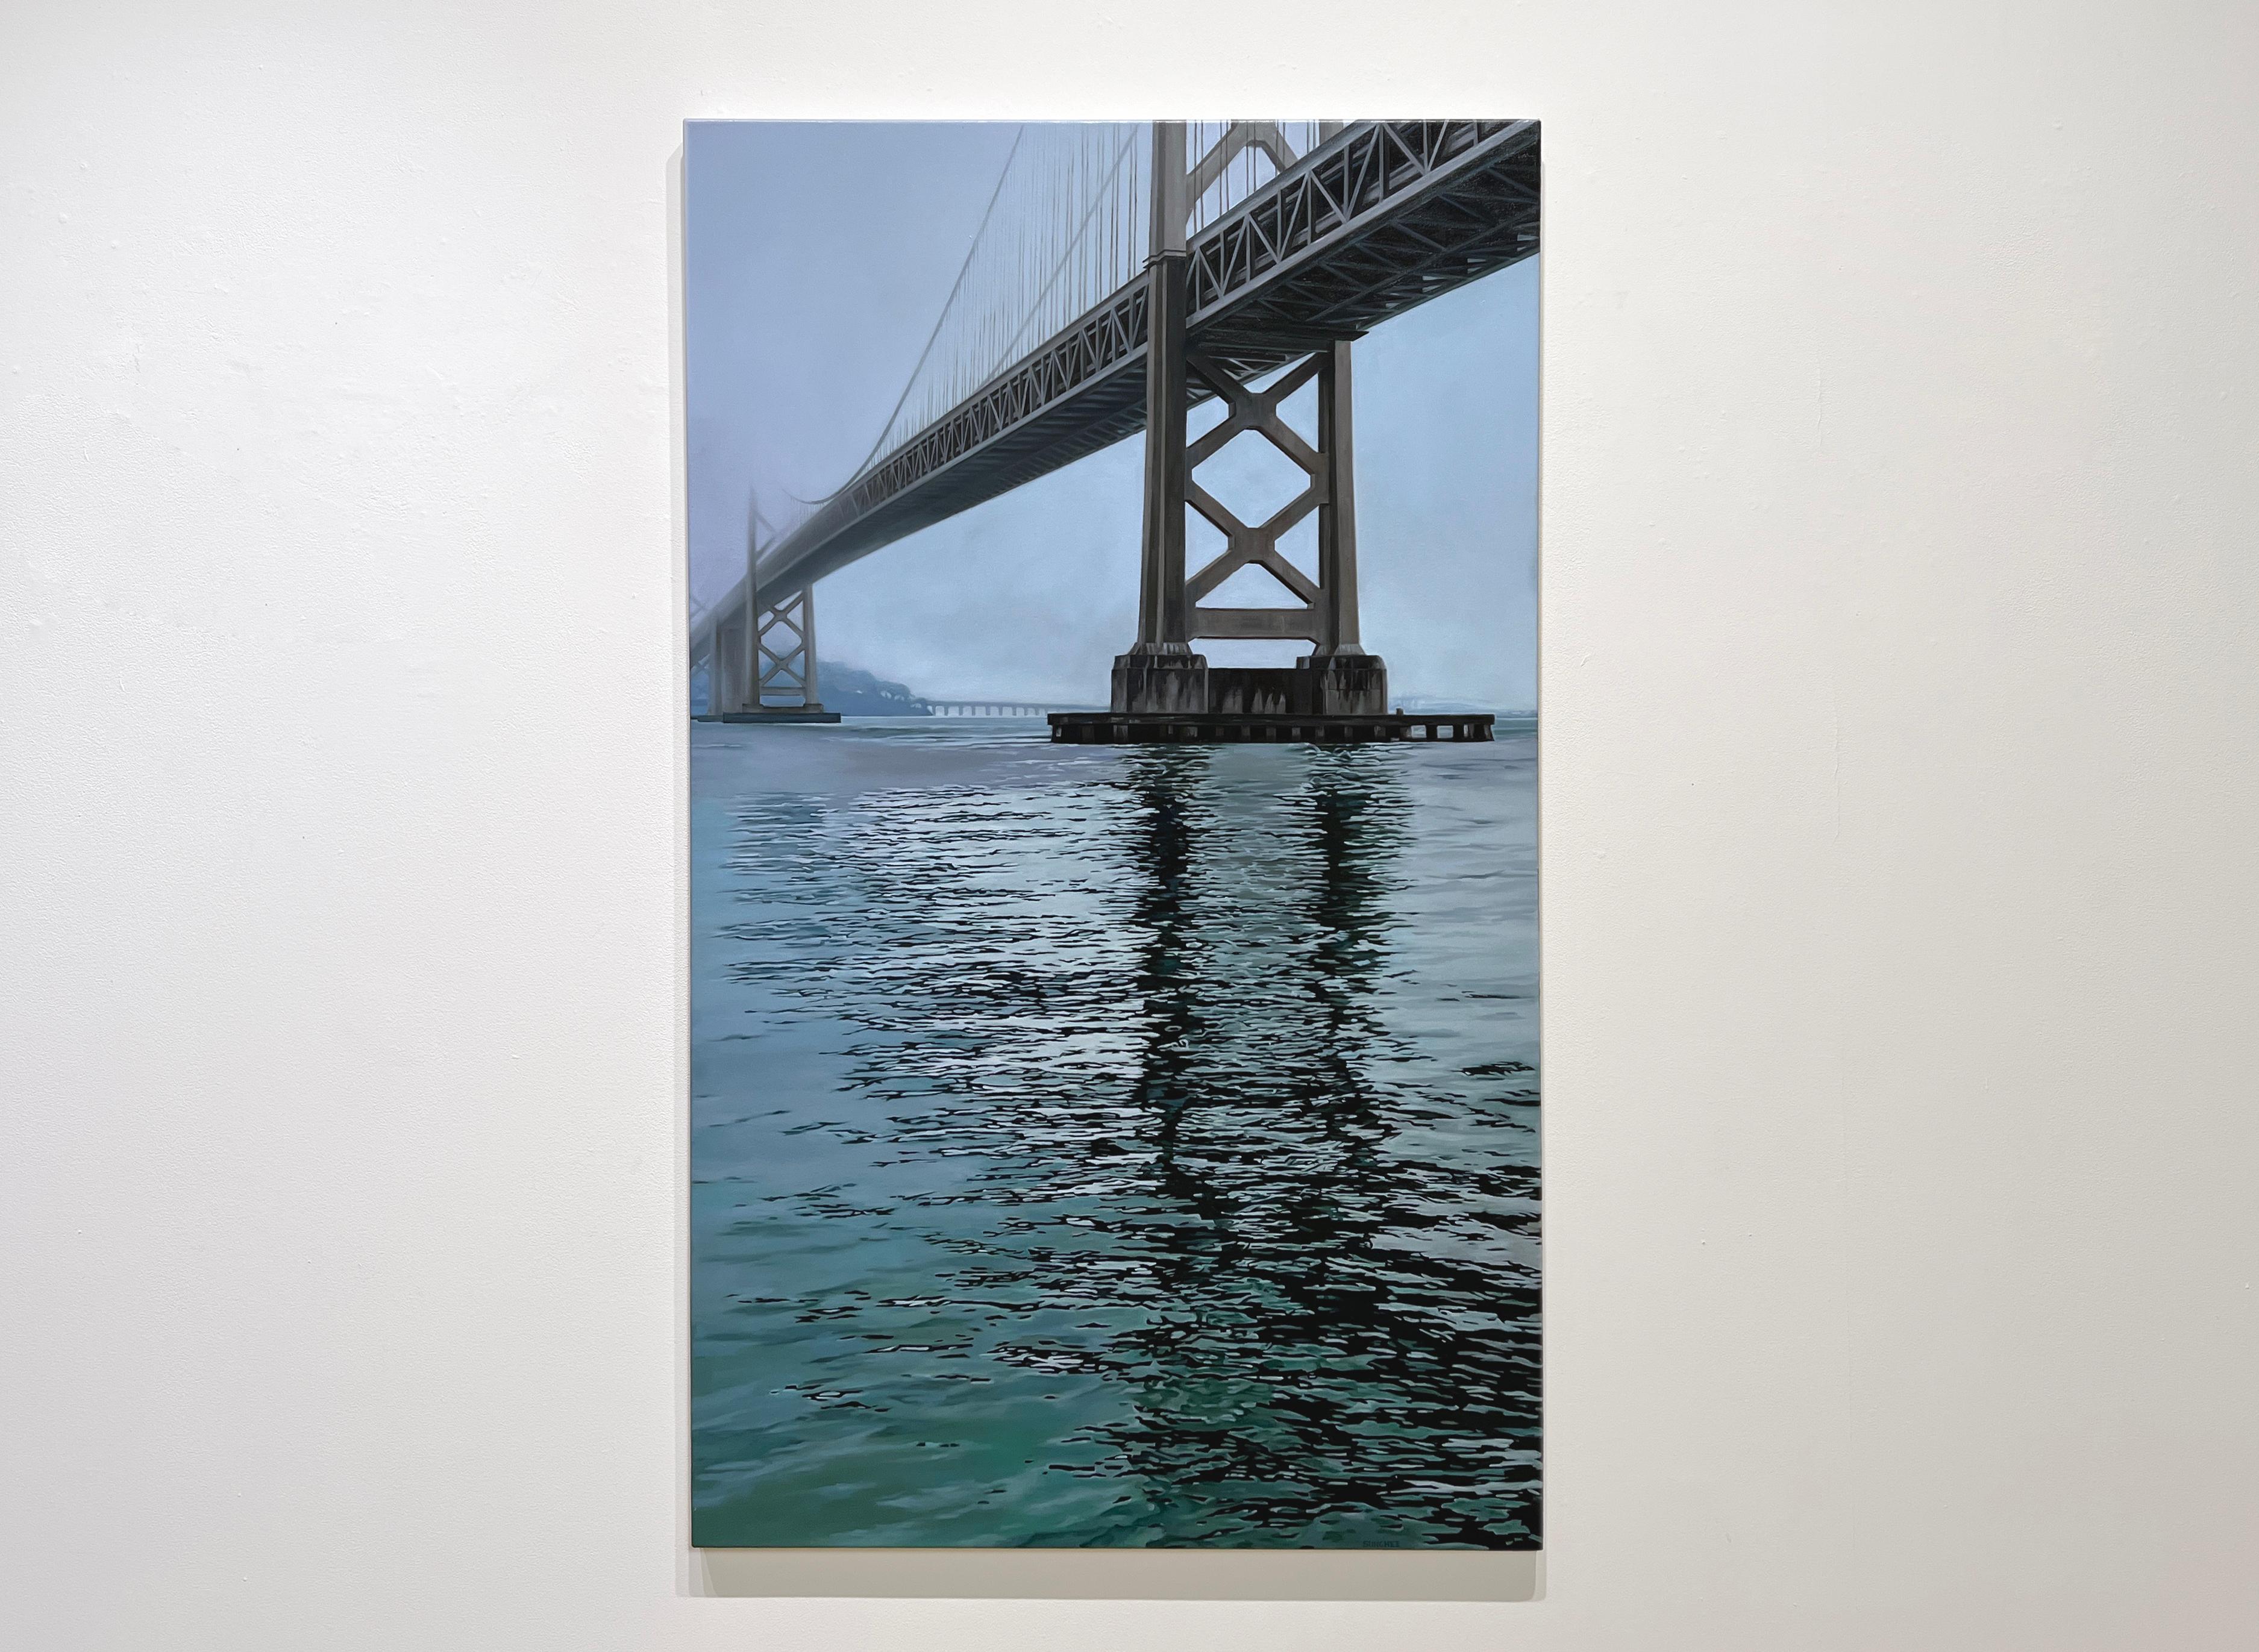 BAY BRIDGE - Contemporary Realism / San Francisco / Light and Shadow - Painting by Sunghee Jang